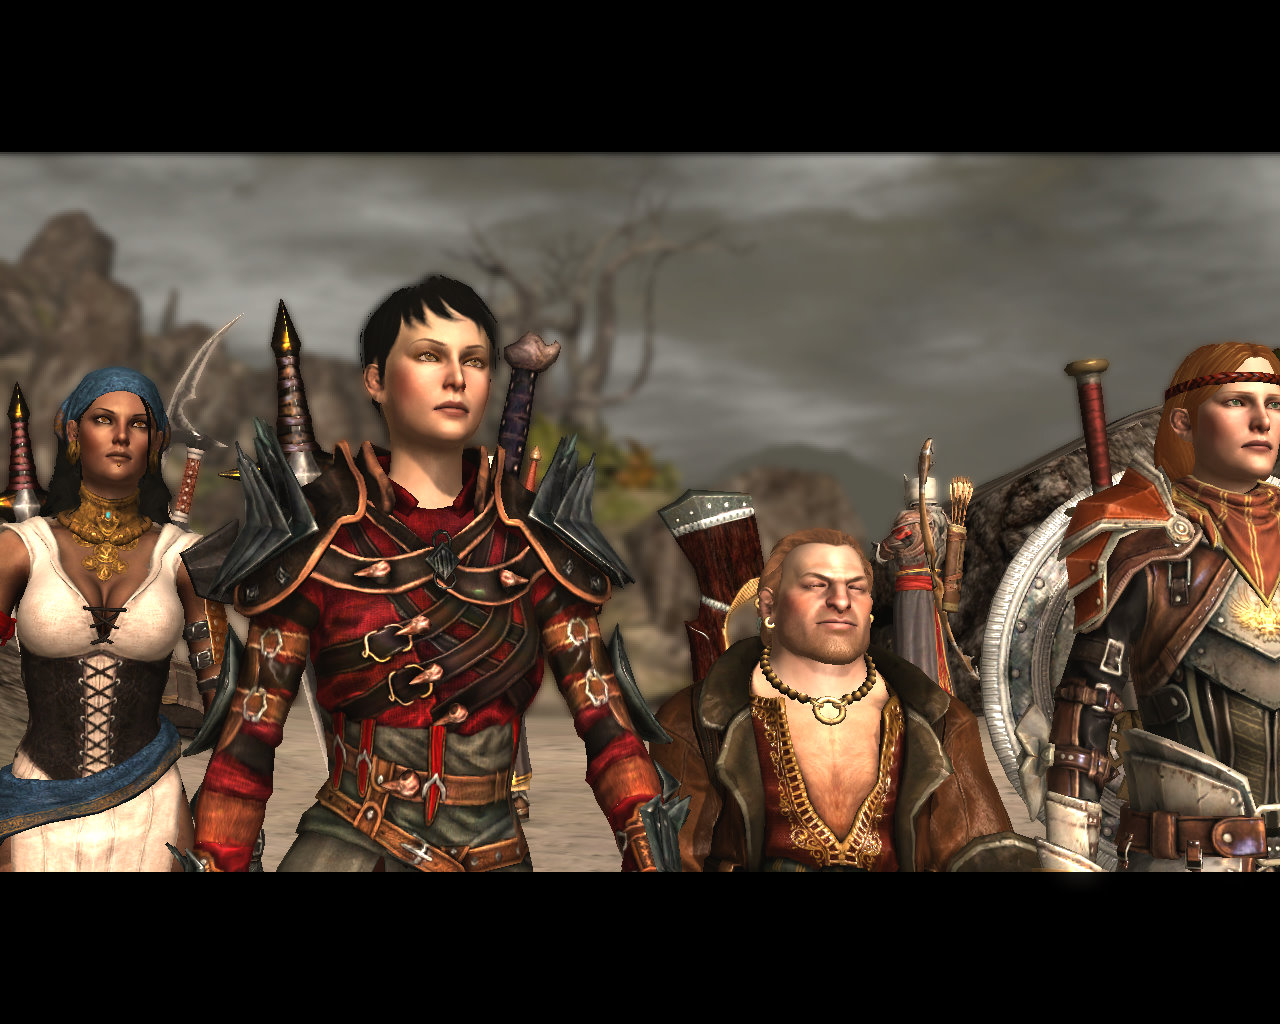 overdrive Profit sympati Game Tourists: Dragon Age 2 Mods that you MUST have if you play on the PC